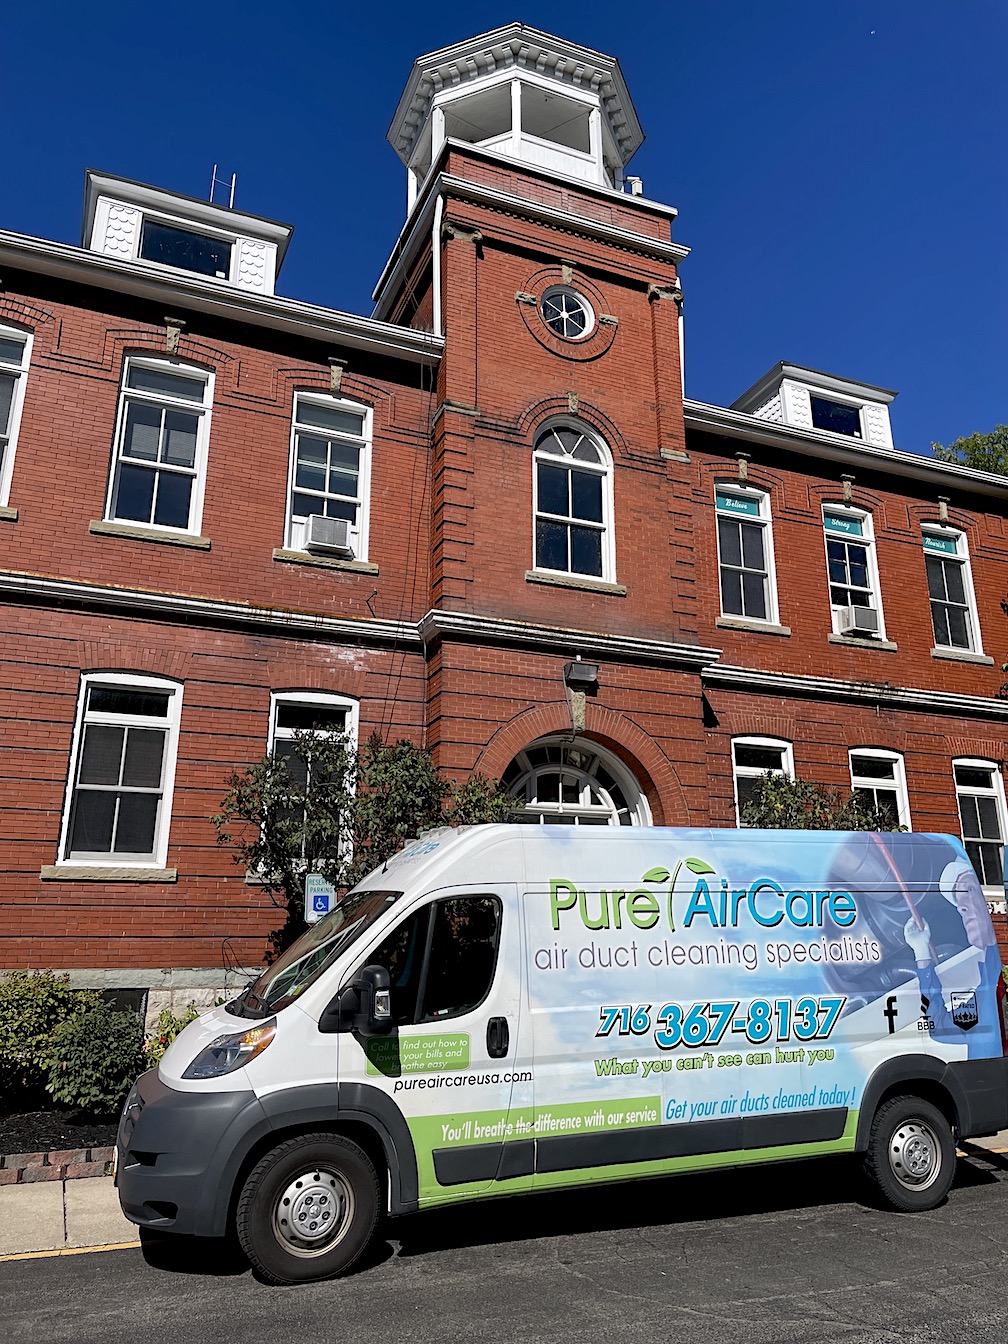 Pure AirCare was hired to clean Red Brick air ducts as part of the overall mold remediation process.